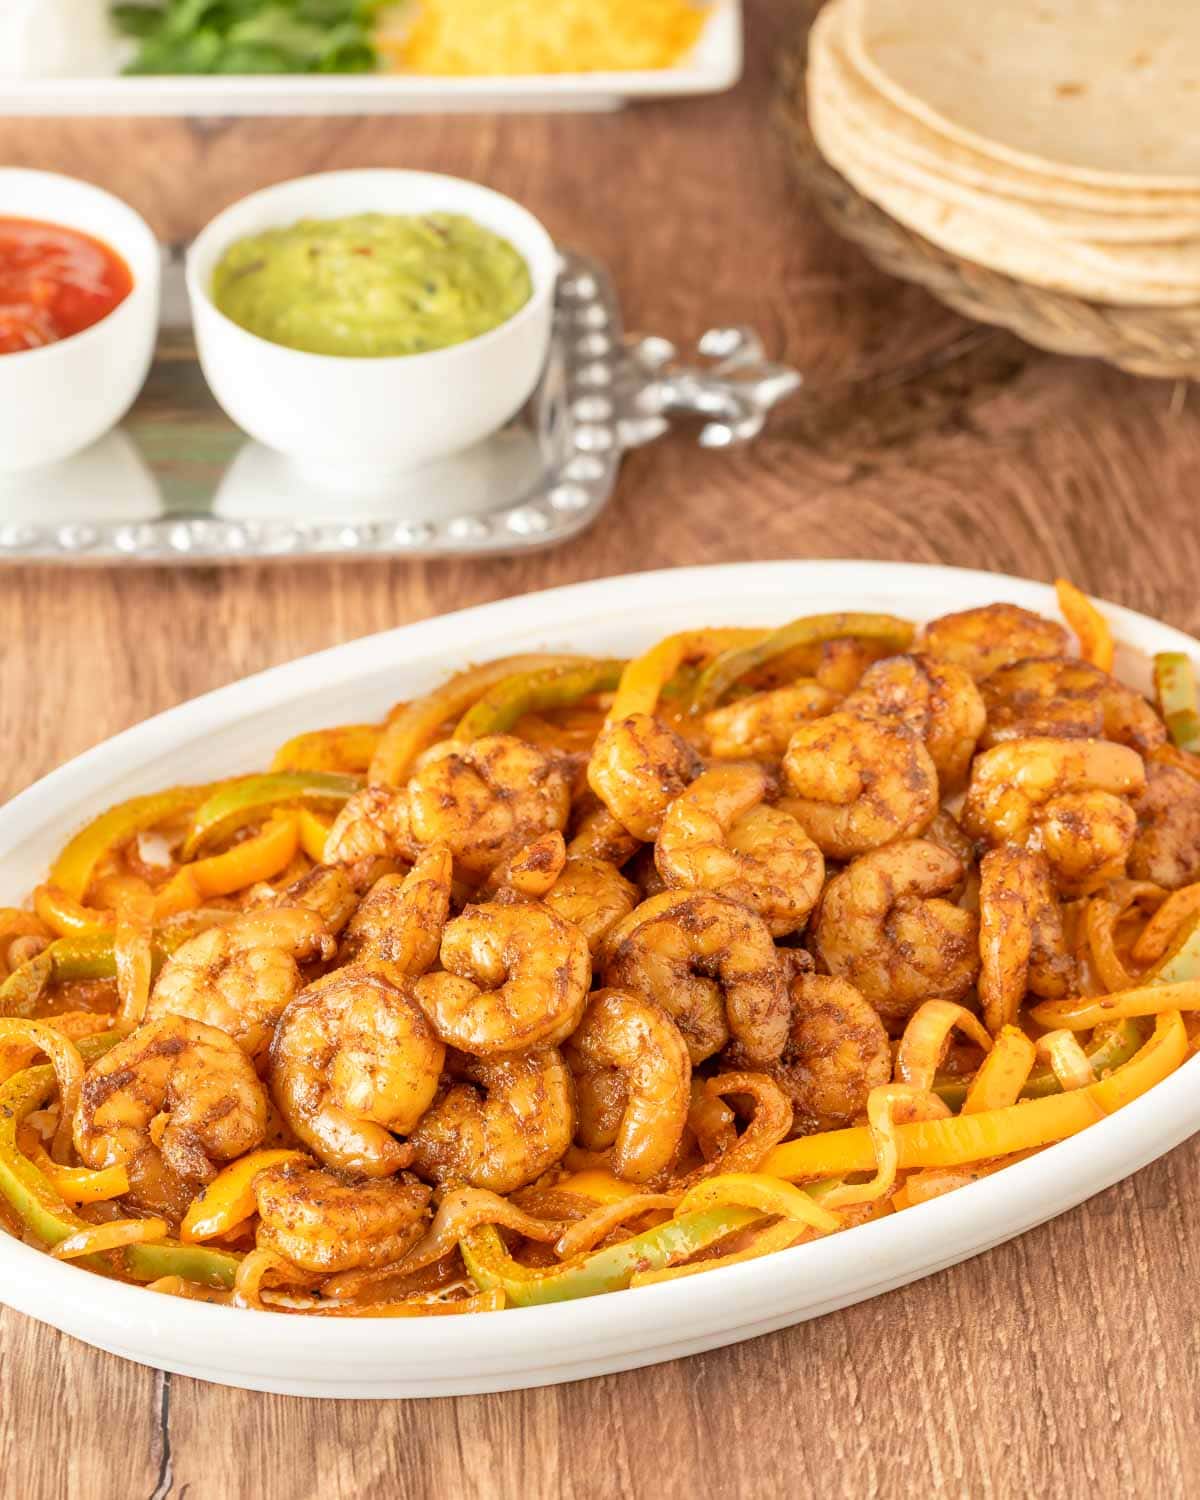 White oval platter holding shrimp fajitas with various toppings and tortillas in the background